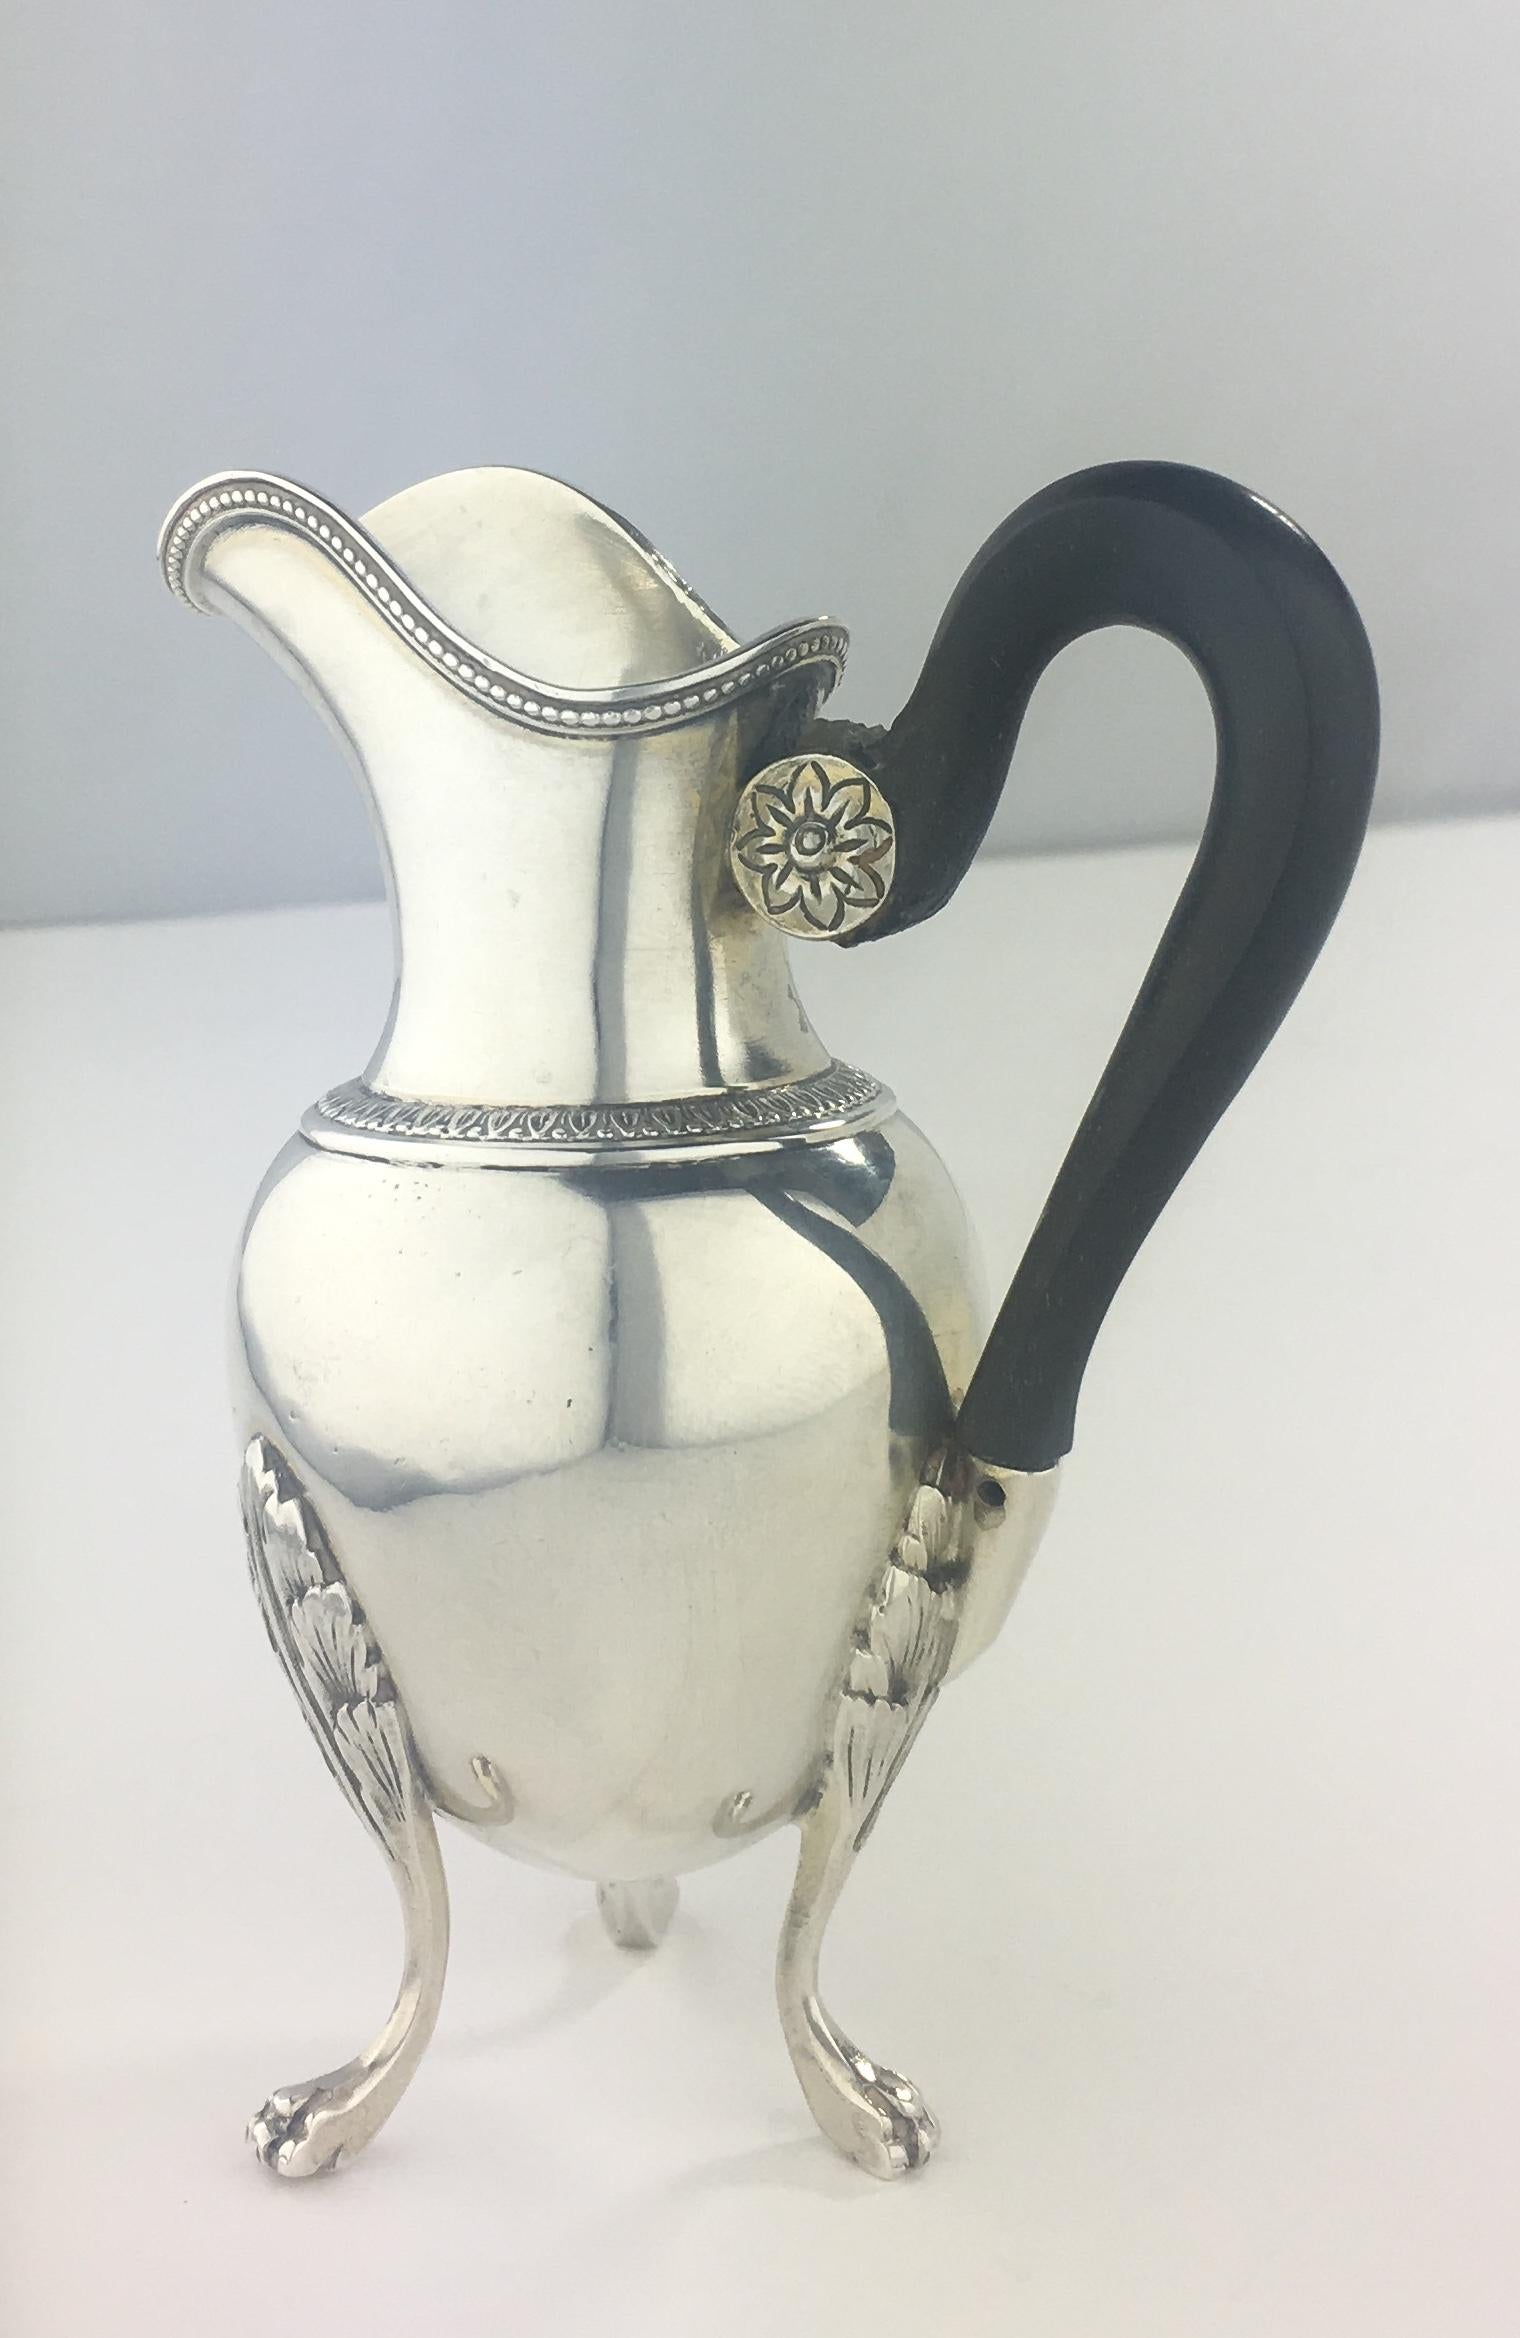 Hand-Crafted Sterling Silver Creamer by French Master Silversmith Andre Aucoc For Sale